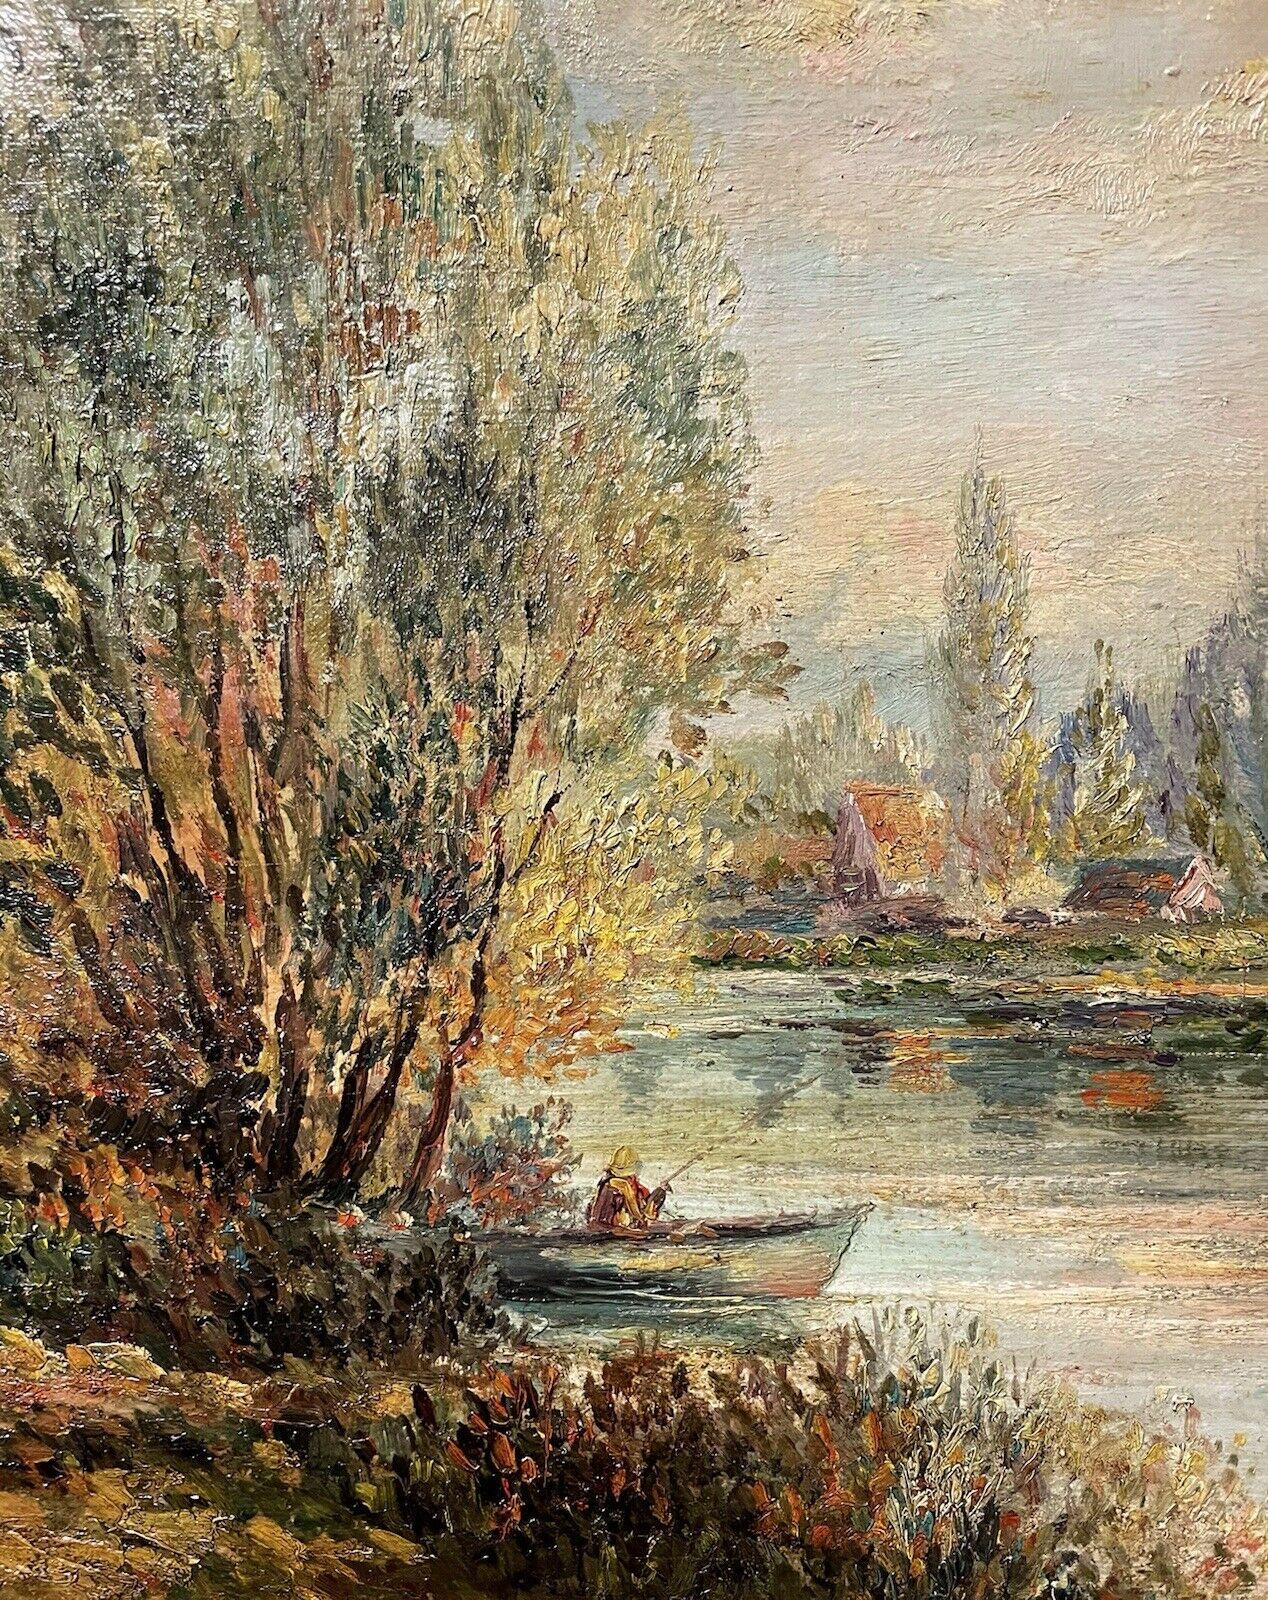 ANTIQUE FRENCH IMPRESSIONIST SIGNED OIL - FIGURE IN BOAT ON RIVER LANDSCAPE - Brown Landscape Painting by Unknown